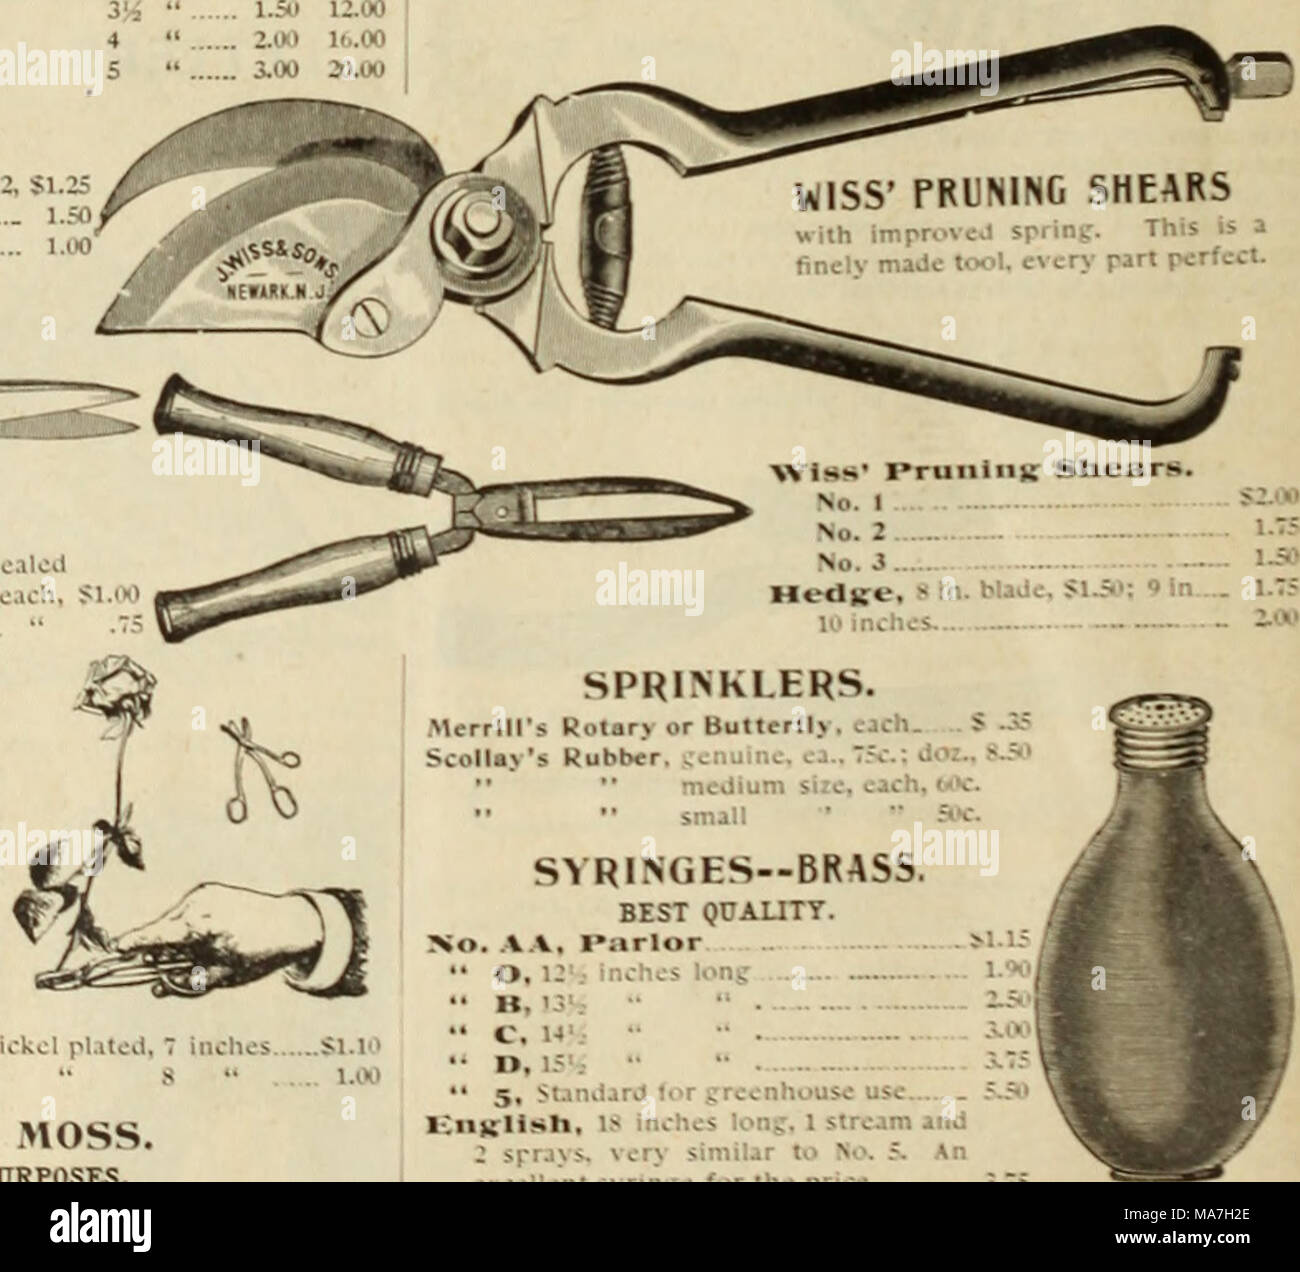 . E.H. Hunt's catalogue : florists' seeds, supplies, bulbs . wire, toothpicks, etc Vine Scissors, Nickel plated The Barnes* Hose and Carnation Cutter, rhls is something entirely net* and is the most complete shear in the market. It is so arranged as to hold the Qowef after cutting, an extra lever being attached for the purpose, which can be used as required. This shear Is In- dispensable to Hose and Car- nation growers. Enameled. Si.25; Nickel, Si.50 FLOWER GATHERER, Nickel plated, 7 laches .. $1.10 •« « 8 &quot; 1.00 SPHAGNUM MOSS. FOR FLORISTS' PURPOSES. We have some of the best Moss ever pu Stock Photo